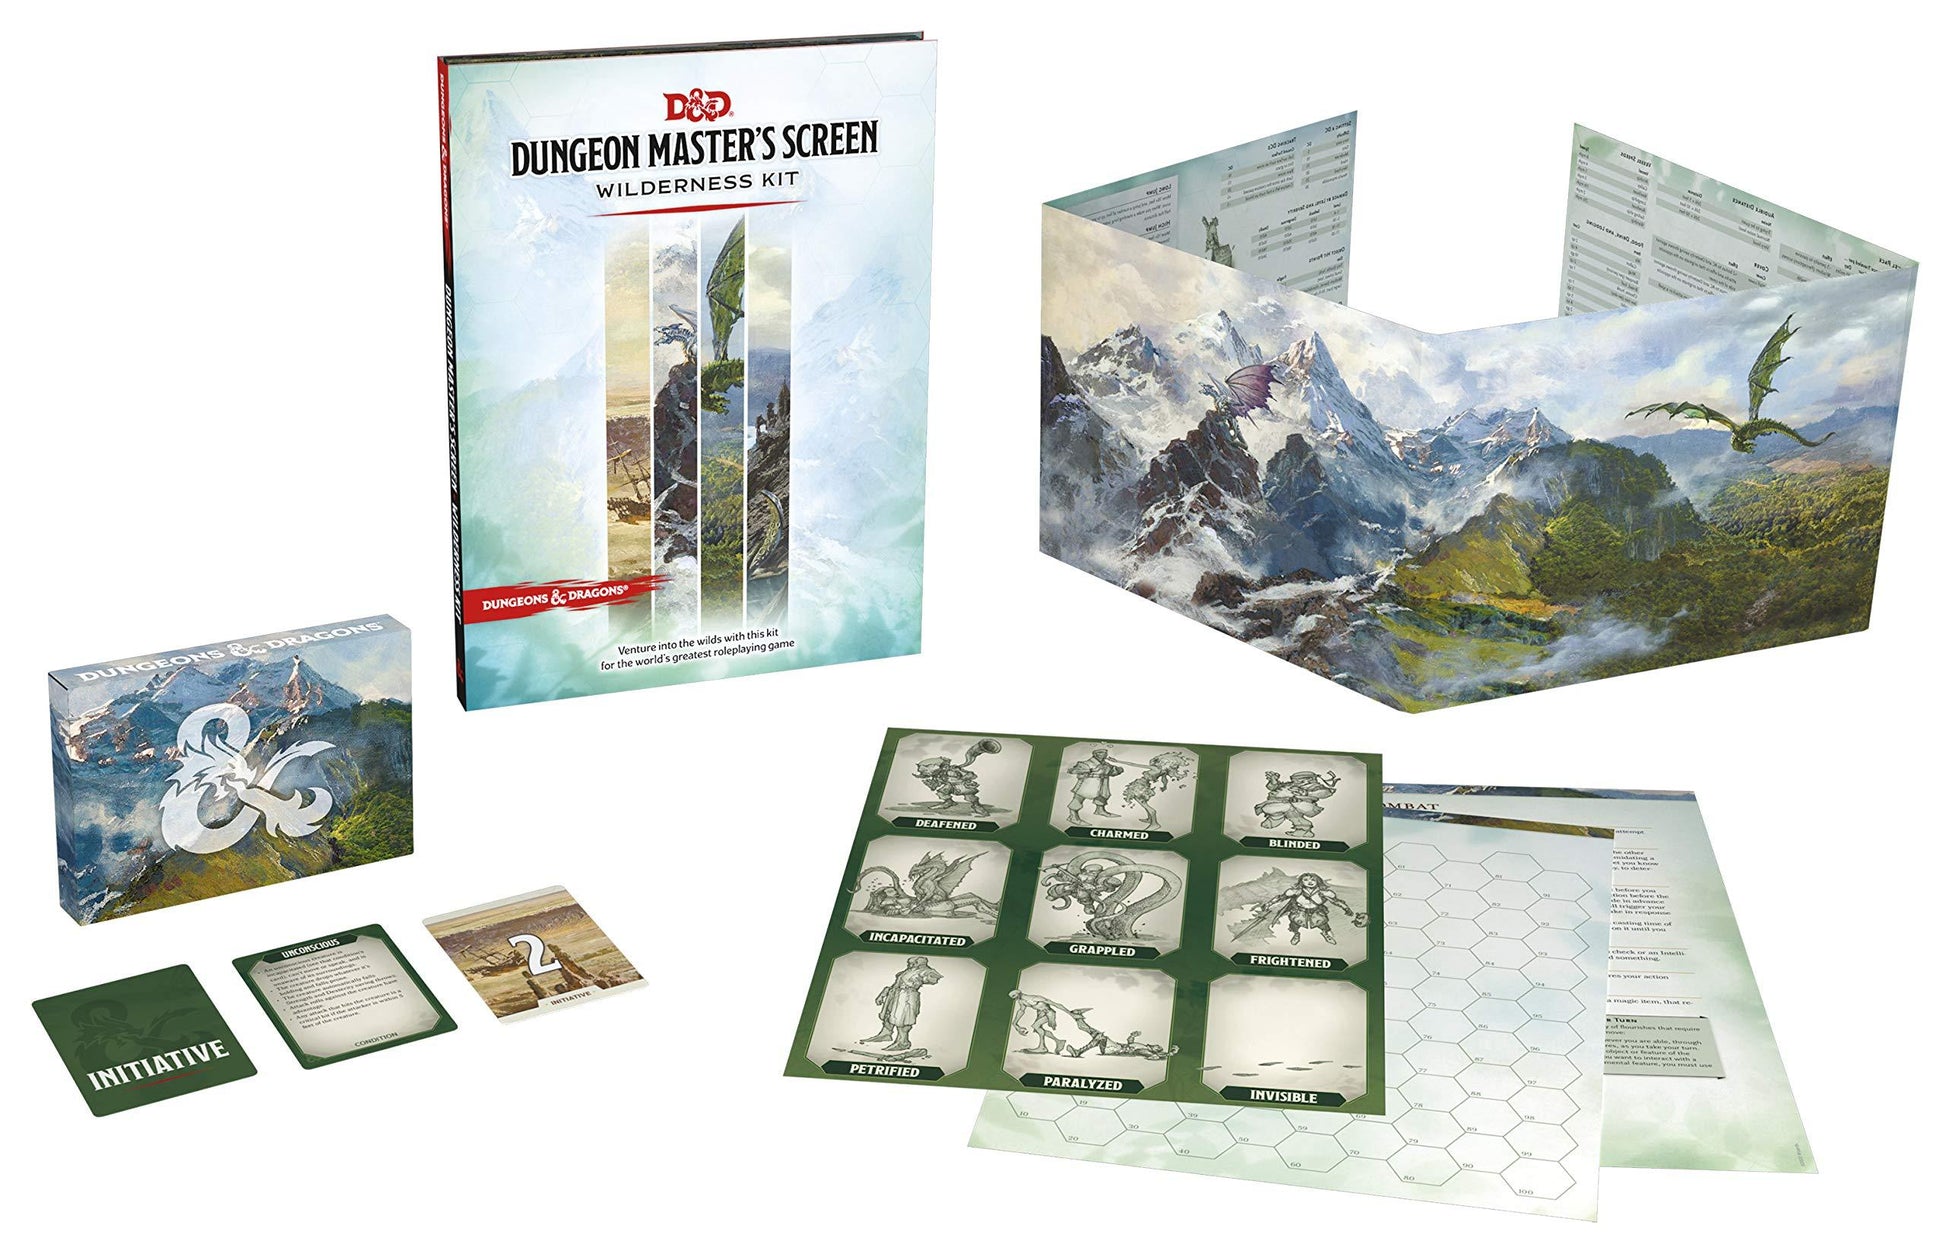 Dungeon Master's Screen Wilderness Kit General Wizards of the Coast 